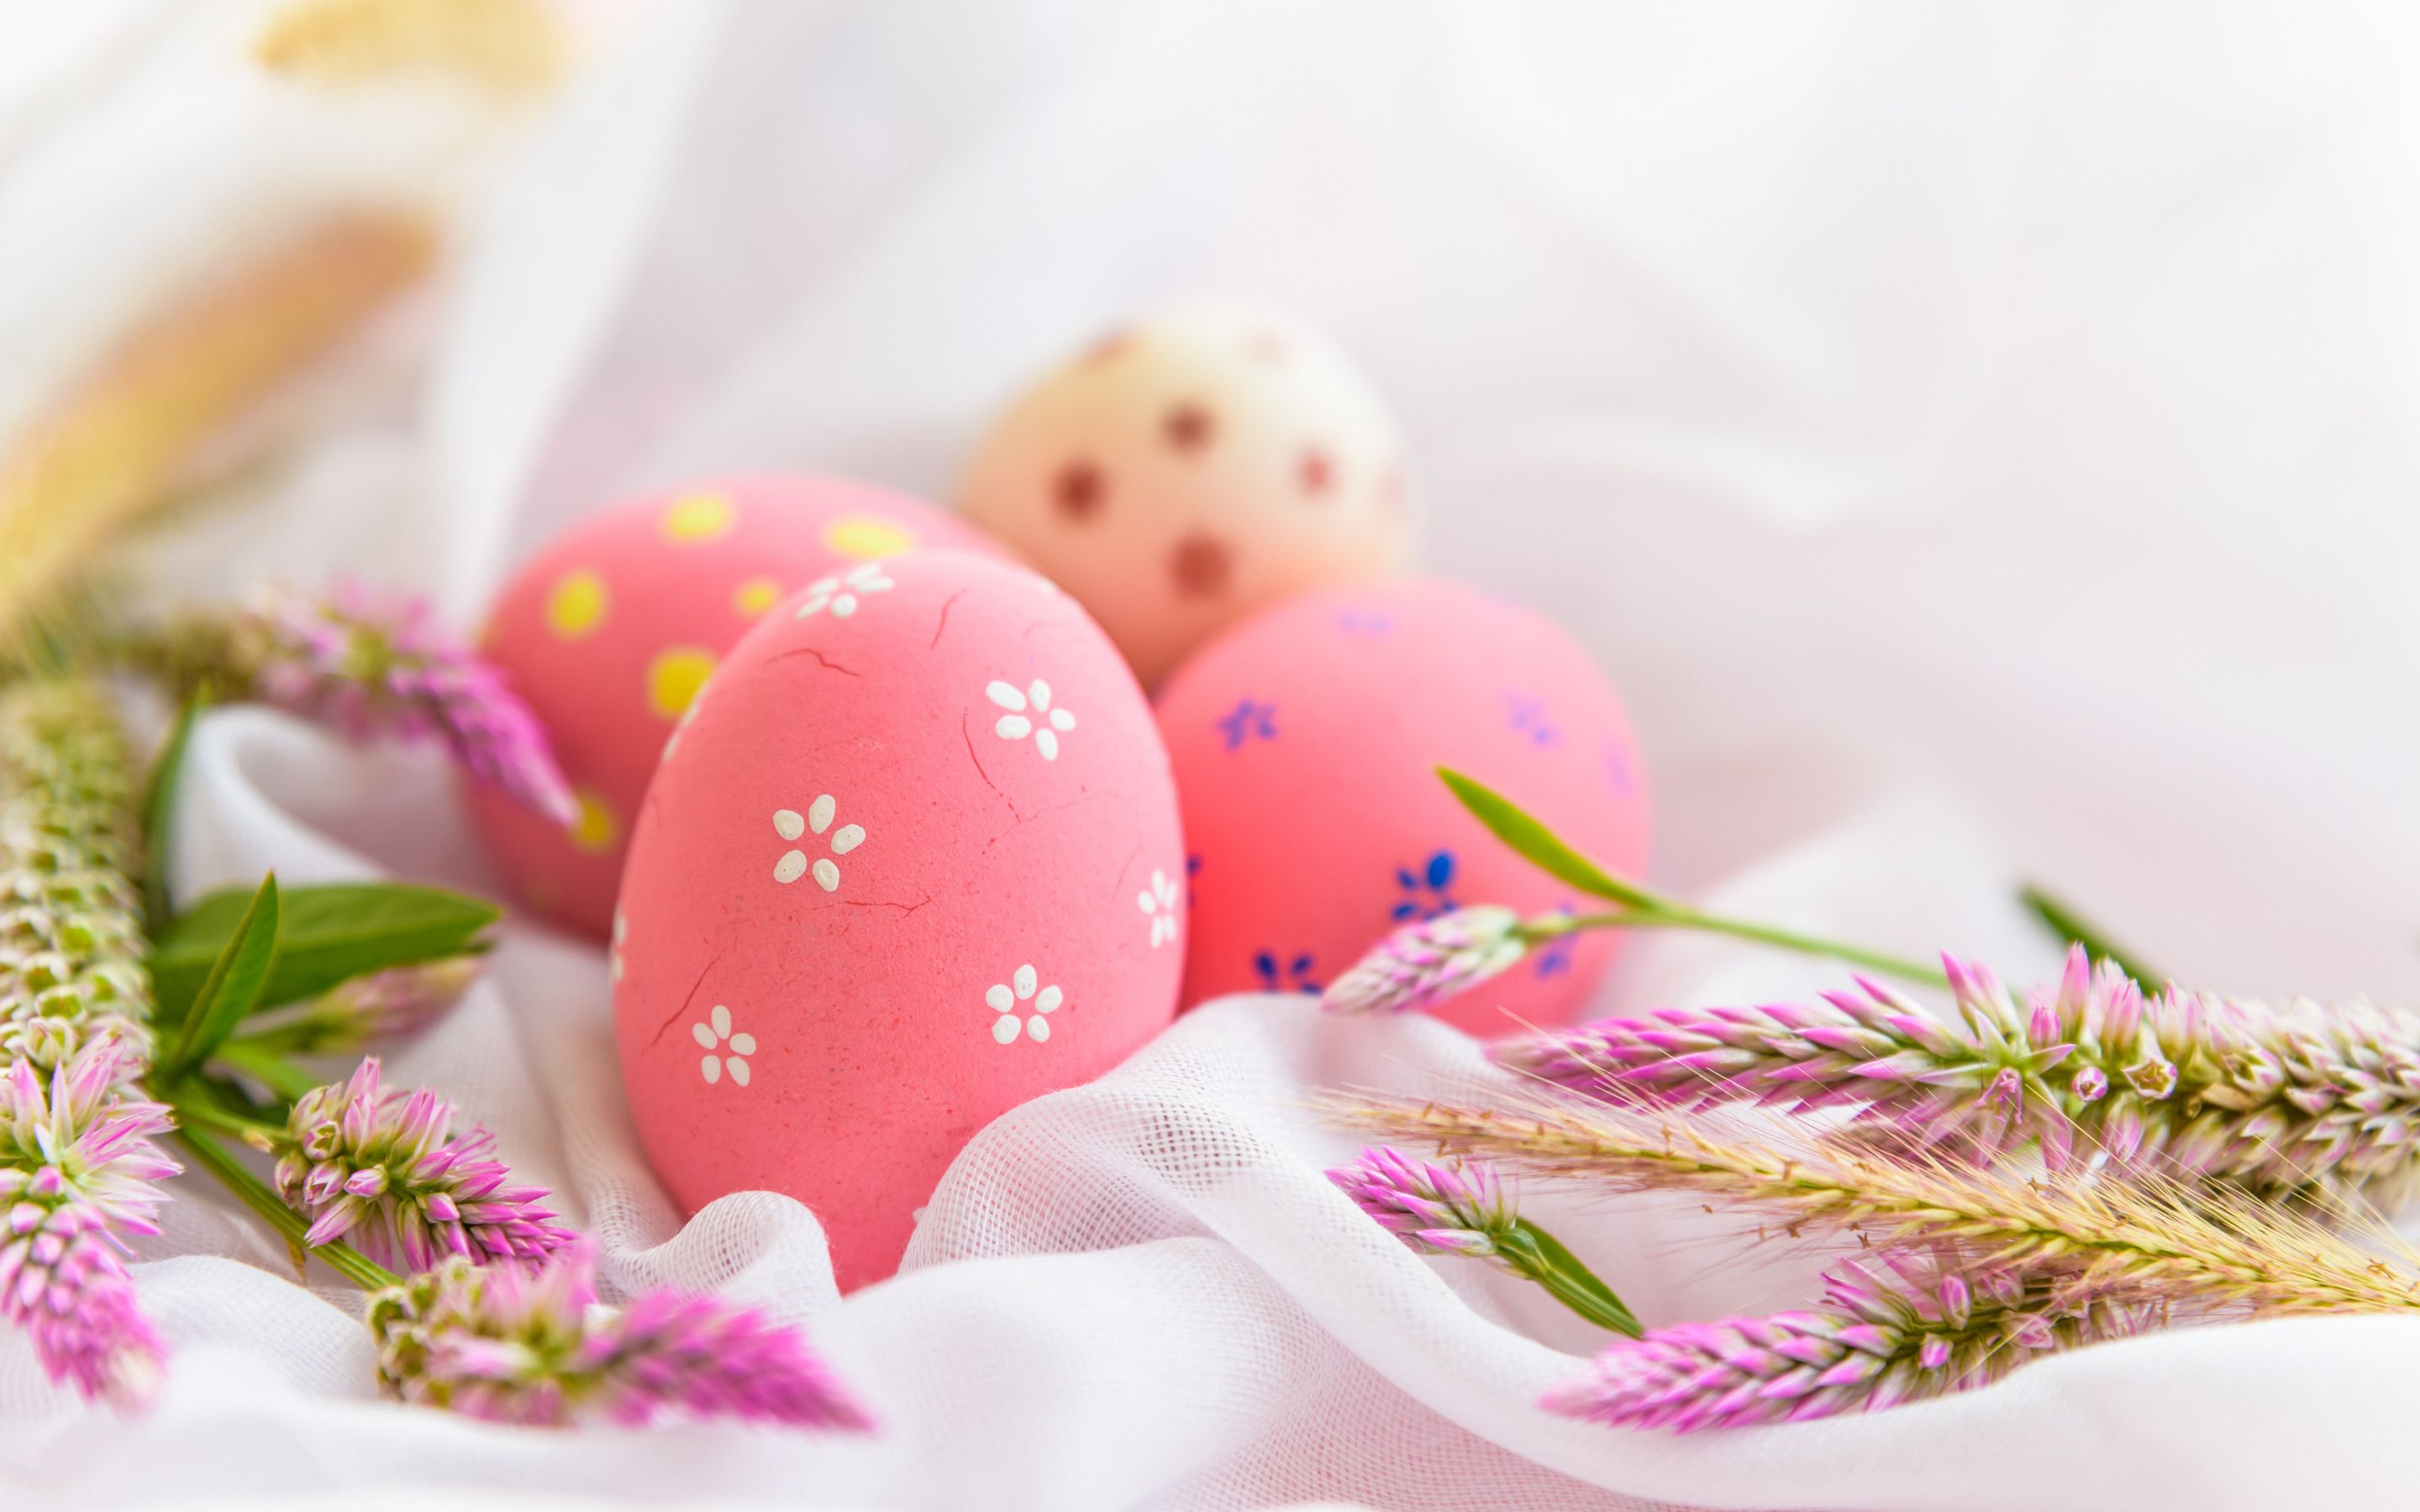 Download wallpaper Pink Easter eggs, spring purple flowers, Easter, pink fabric, Easter background for desktop with resolution 2880x1800. High Quality HD picture wallpaper